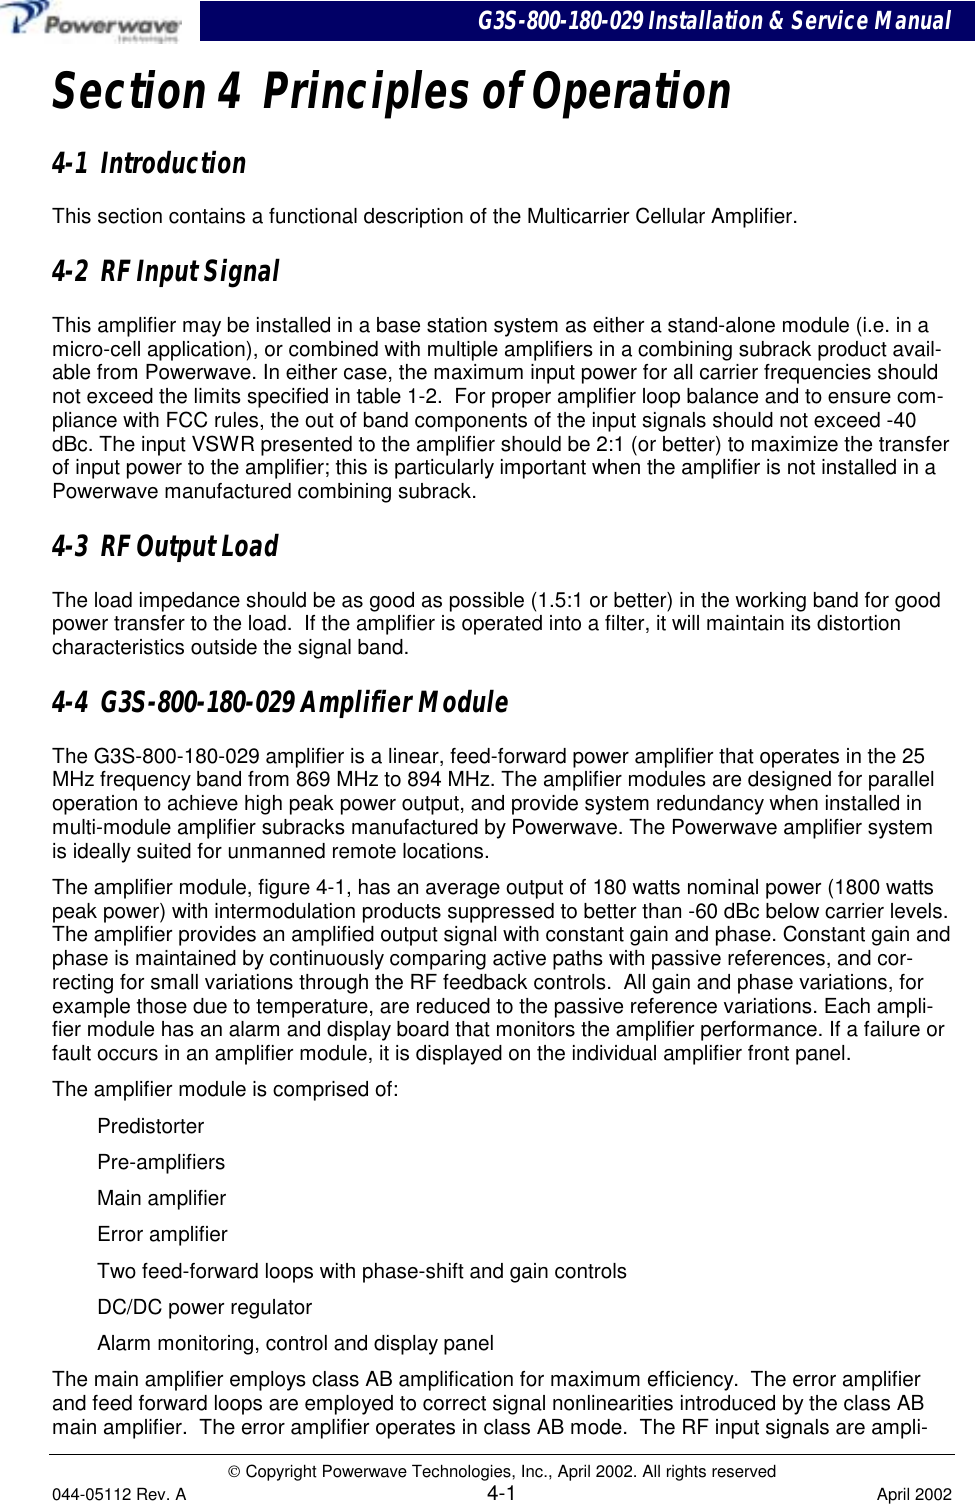 G3S-800-180-029 Installation &amp; Service Manual Copyright Powerwave Technologies, Inc., April 2002. All rights reserved044-05112 Rev. A 4-1 April 2002Section 4  Principles of Operation4-1  IntroductionThis section contains a functional description of the Multicarrier Cellular Amplifier.4-2  RF Input SignalThis amplifier may be installed in a base station system as either a stand-alone module (i.e. in amicro-cell application), or combined with multiple amplifiers in a combining subrack product avail-able from Powerwave. In either case, the maximum input power for all carrier frequencies shouldnot exceed the limits specified in table 1-2.  For proper amplifier loop balance and to ensure com-pliance with FCC rules, the out of band components of the input signals should not exceed -40dBc. The input VSWR presented to the amplifier should be 2:1 (or better) to maximize the transferof input power to the amplifier; this is particularly important when the amplifier is not installed in aPowerwave manufactured combining subrack.4-3  RF Output LoadThe load impedance should be as good as possible (1.5:1 or better) in the working band for goodpower transfer to the load.  If the amplifier is operated into a filter, it will maintain its distortioncharacteristics outside the signal band.4-4  G3S-800-180-029 Amplifier ModuleThe G3S-800-180-029 amplifier is a linear, feed-forward power amplifier that operates in the 25MHz frequency band from 869 MHz to 894 MHz. The amplifier modules are designed for paralleloperation to achieve high peak power output, and provide system redundancy when installed inmulti-module amplifier subracks manufactured by Powerwave. The Powerwave amplifier systemis ideally suited for unmanned remote locations.The amplifier module, figure 4-1, has an average output of 180 watts nominal power (1800 wattspeak power) with intermodulation products suppressed to better than -60 dBc below carrier levels.The amplifier provides an amplified output signal with constant gain and phase. Constant gain andphase is maintained by continuously comparing active paths with passive references, and cor-recting for small variations through the RF feedback controls.  All gain and phase variations, forexample those due to temperature, are reduced to the passive reference variations. Each ampli-fier module has an alarm and display board that monitors the amplifier performance. If a failure orfault occurs in an amplifier module, it is displayed on the individual amplifier front panel.The amplifier module is comprised of:PredistorterPre-amplifiersMain amplifierError amplifierTwo feed-forward loops with phase-shift and gain controlsDC/DC power regulatorAlarm monitoring, control and display panelThe main amplifier employs class AB amplification for maximum efficiency.  The error amplifierand feed forward loops are employed to correct signal nonlinearities introduced by the class ABmain amplifier.  The error amplifier operates in class AB mode.  The RF input signals are ampli-